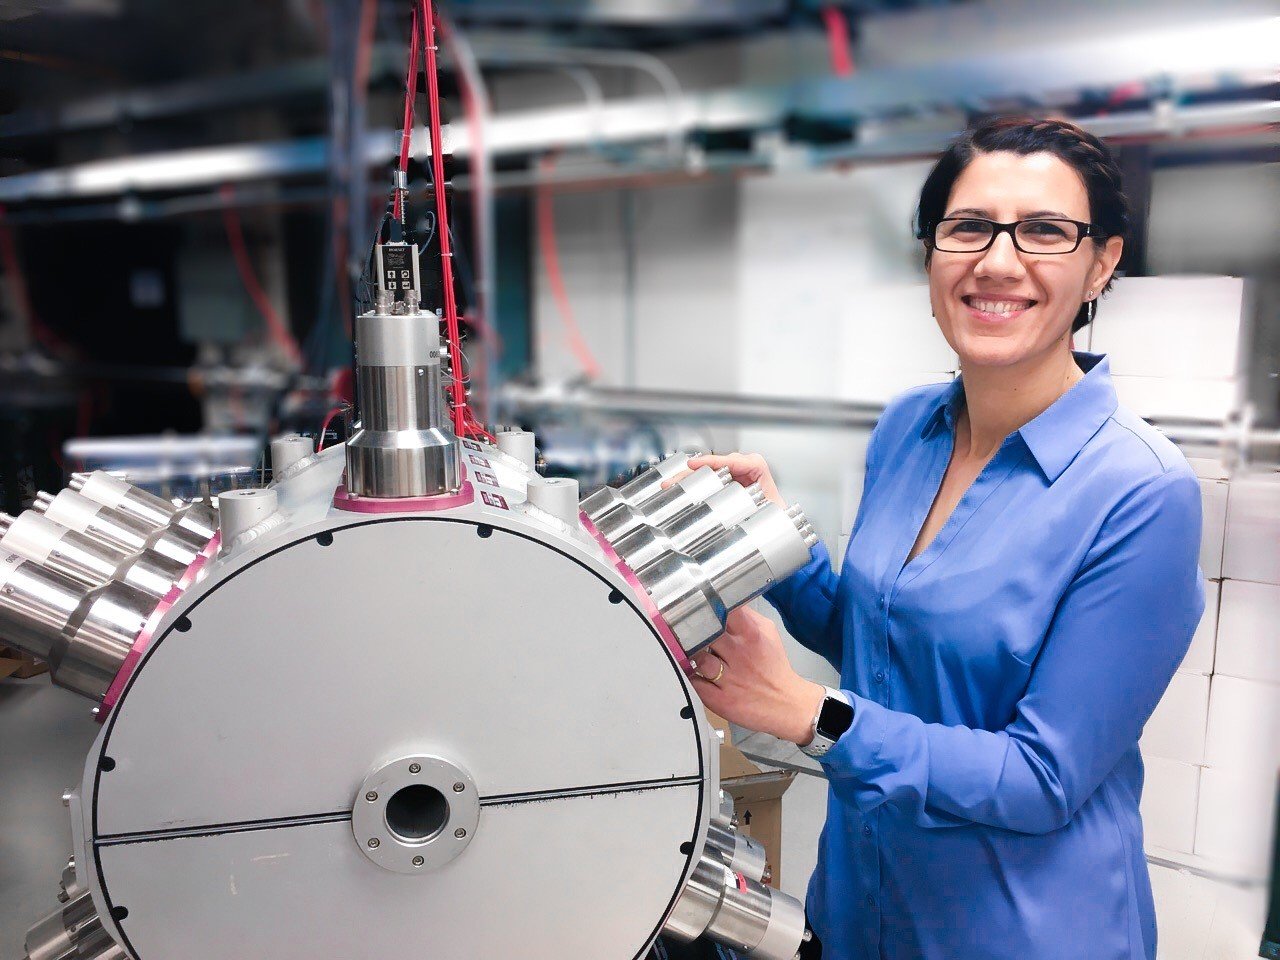 “We’re trying to understand how stars work, and how they create the elements,” said physics Professor Artemis Spyrou, shown here working on a gamma ray detector used to measure nuclear reactions.